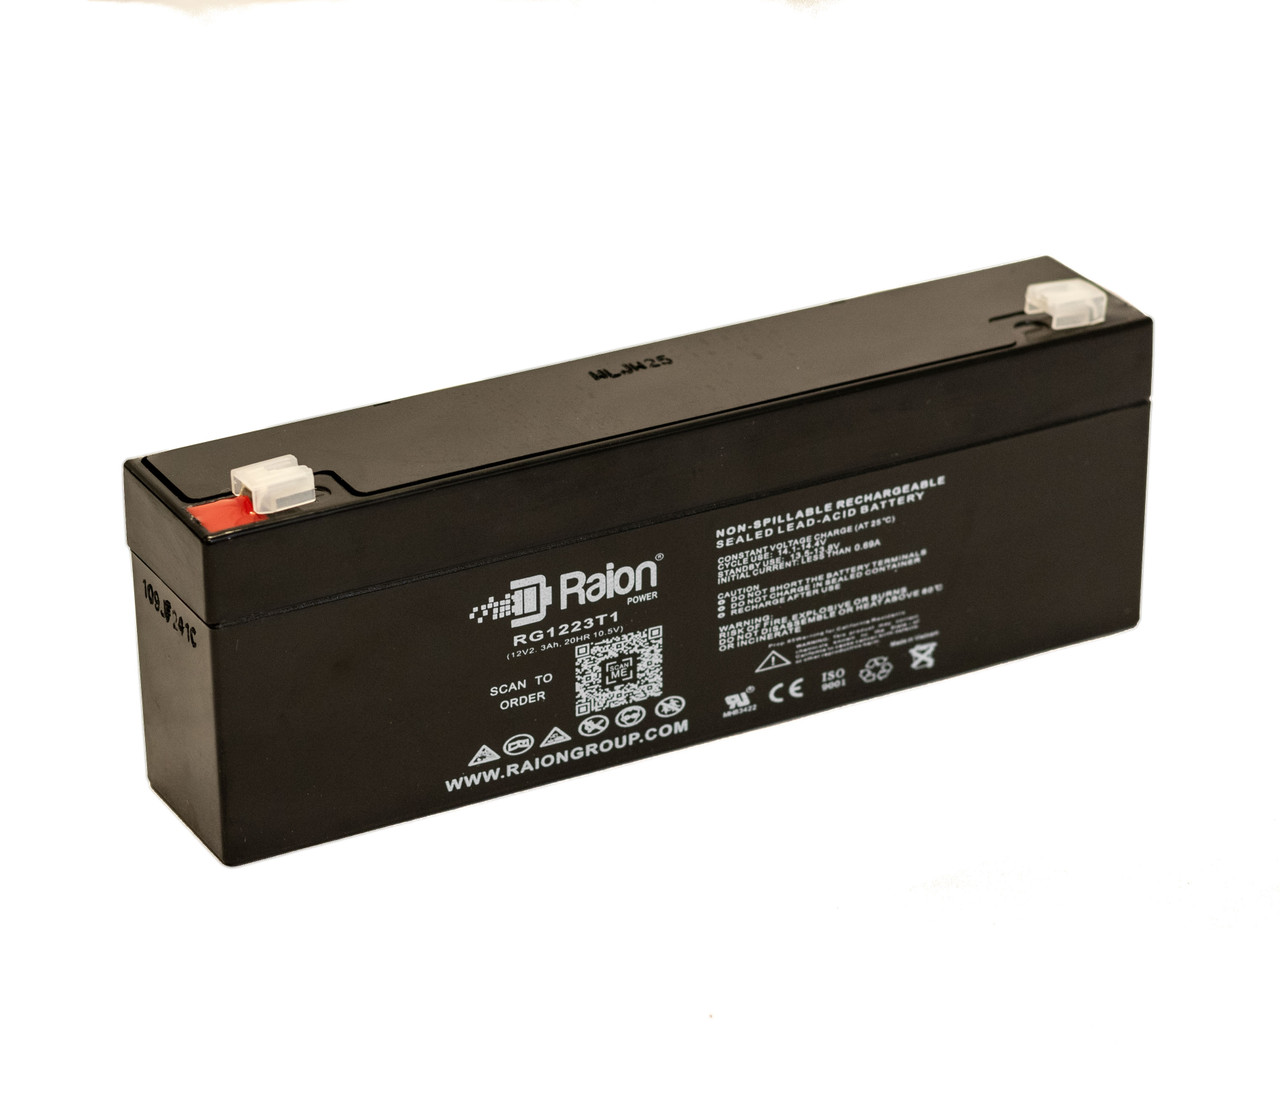 Raion Power RG1223T1 Replacement Battery for Unipower B10015-2